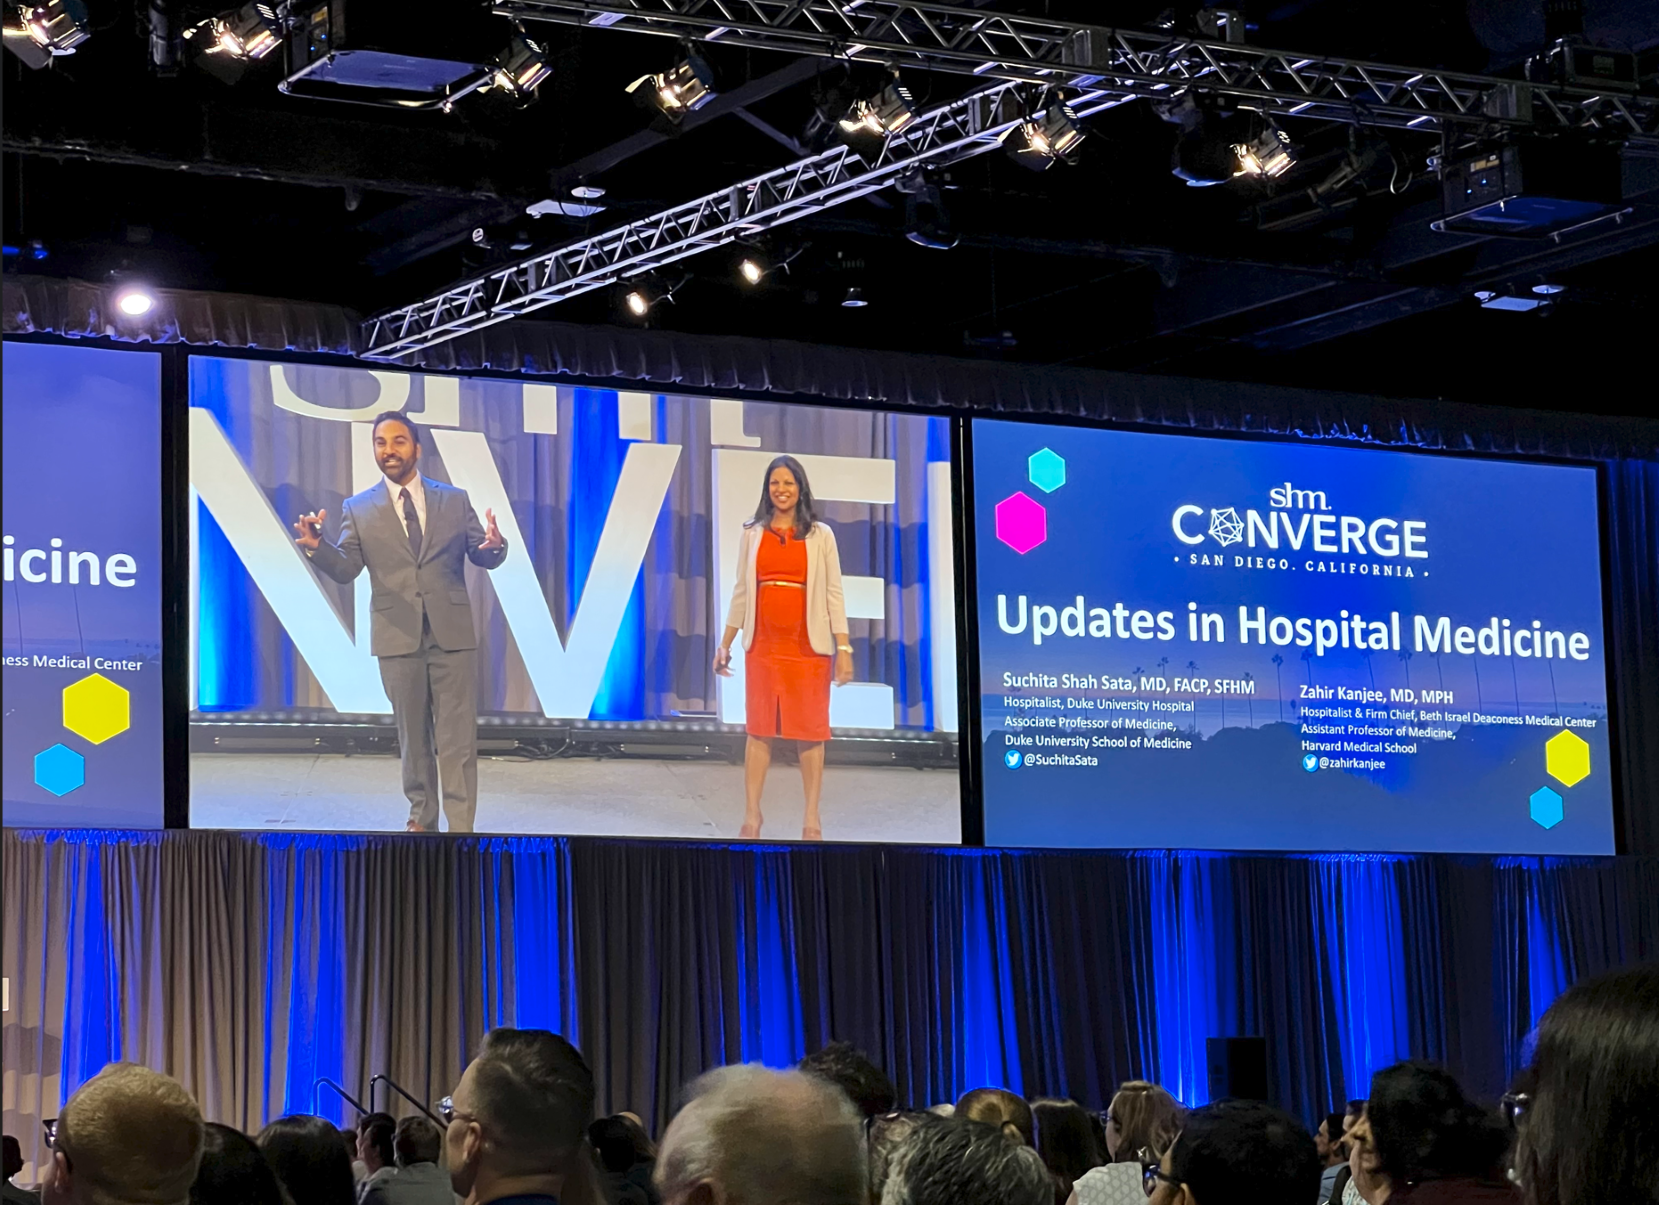 Dr. Suchita Shah Sata's presentation “Update in Hospital Medicine” plenary session at the SHM National Meeting in San Diego.